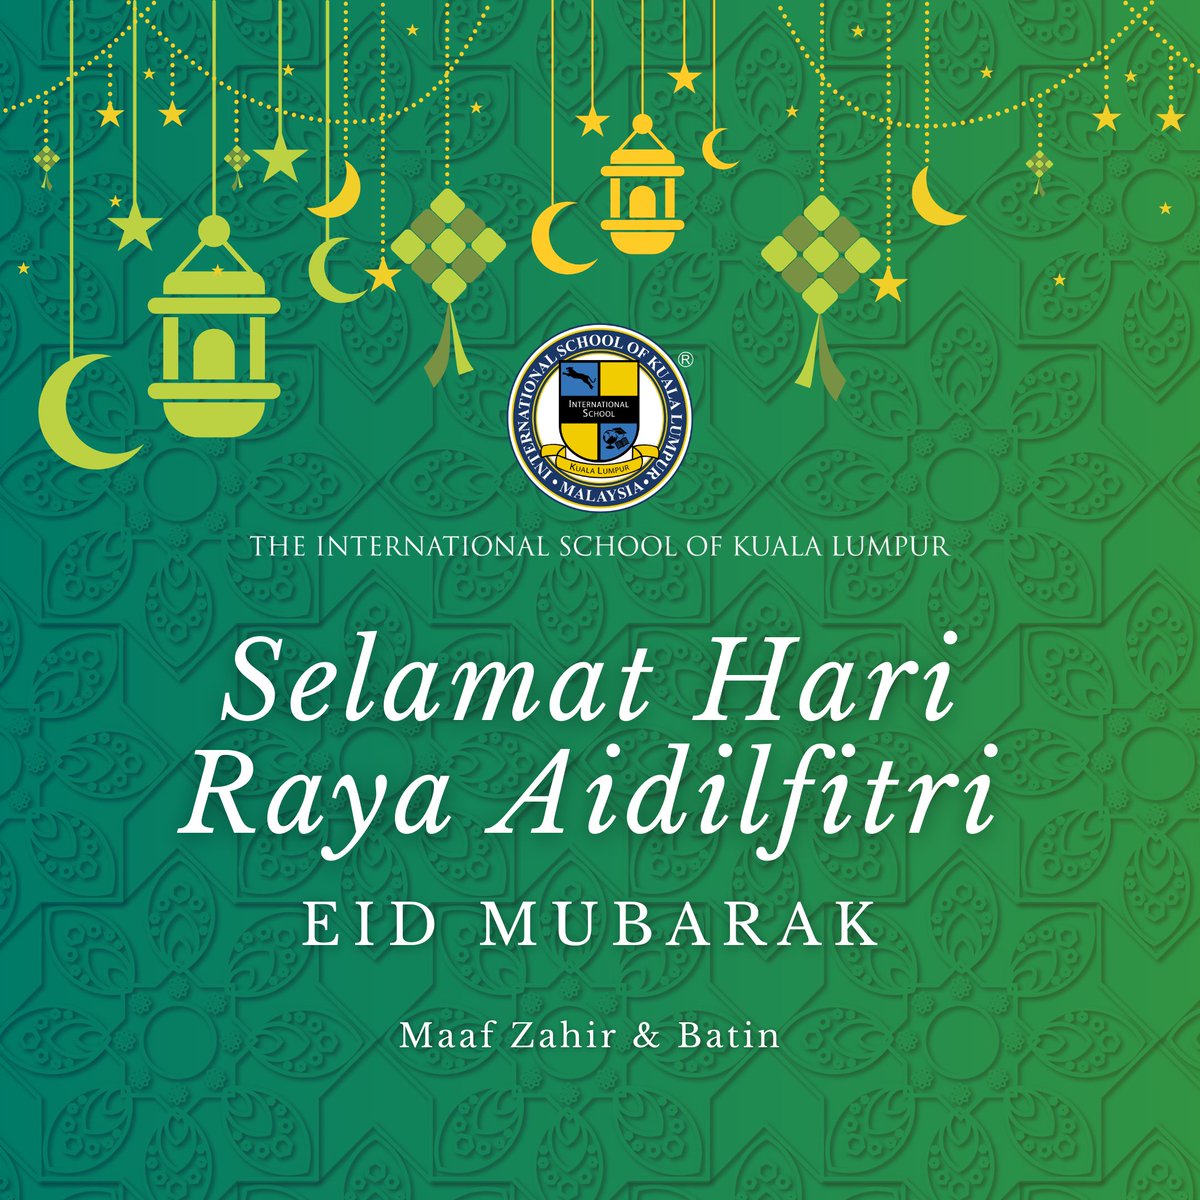 Today we celebrate the joyous festival of Hari Raya Aidilfitri, which marks the end of Ramadan. ISKL wishes our community a day of celebrations, food, and love. Happy Eid Mubarak! 🕌🌟 #ISKL #ISKLProud